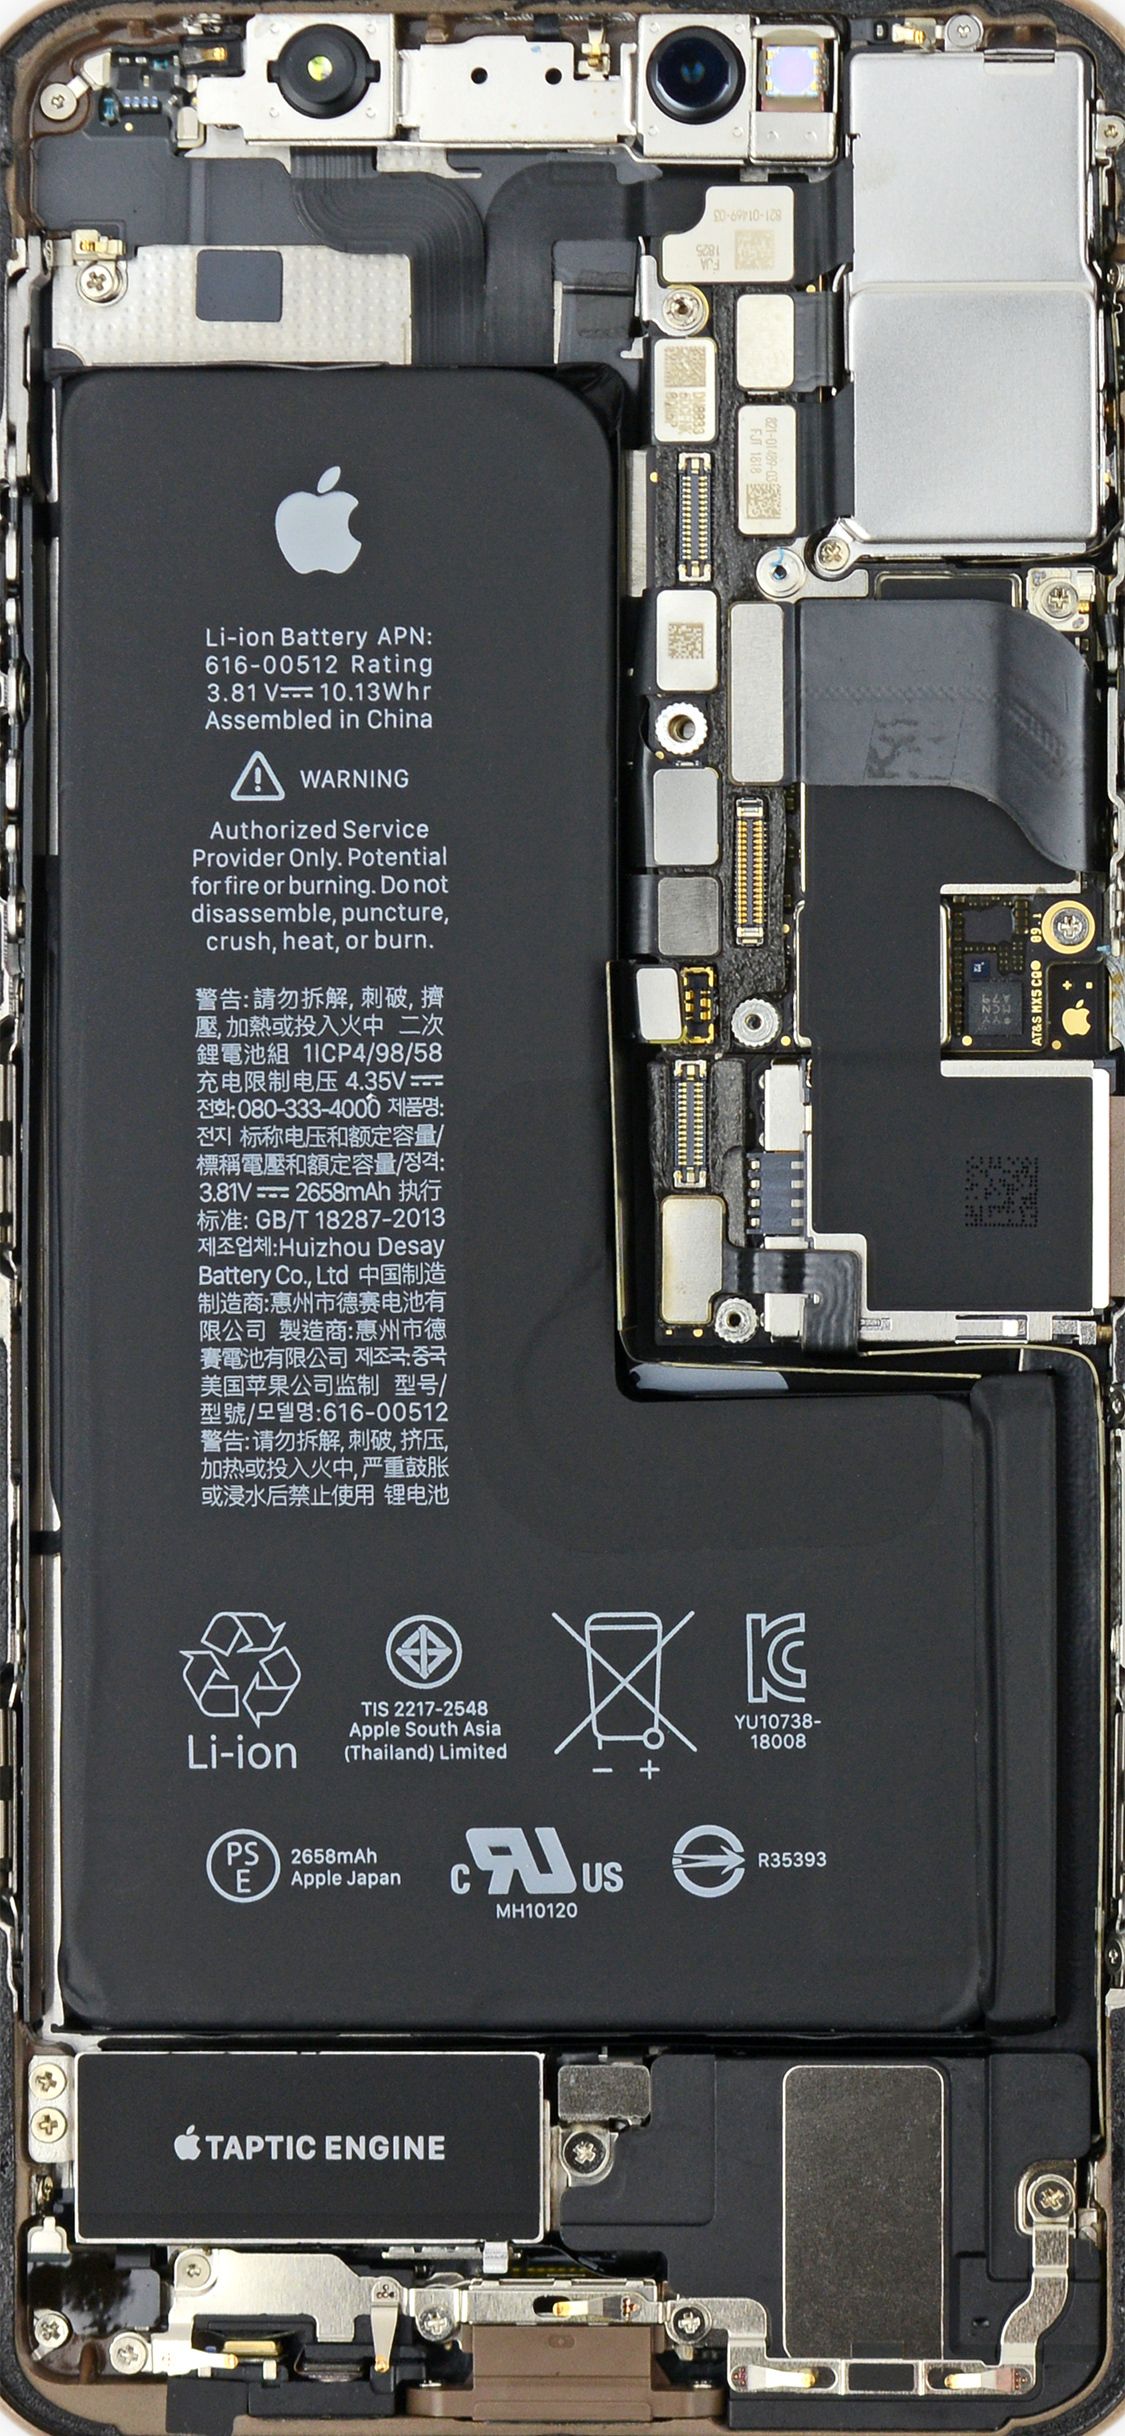 iphone 6 internals wallpaper,electronic device,technology,battery,mobile phone battery,electronics accessory